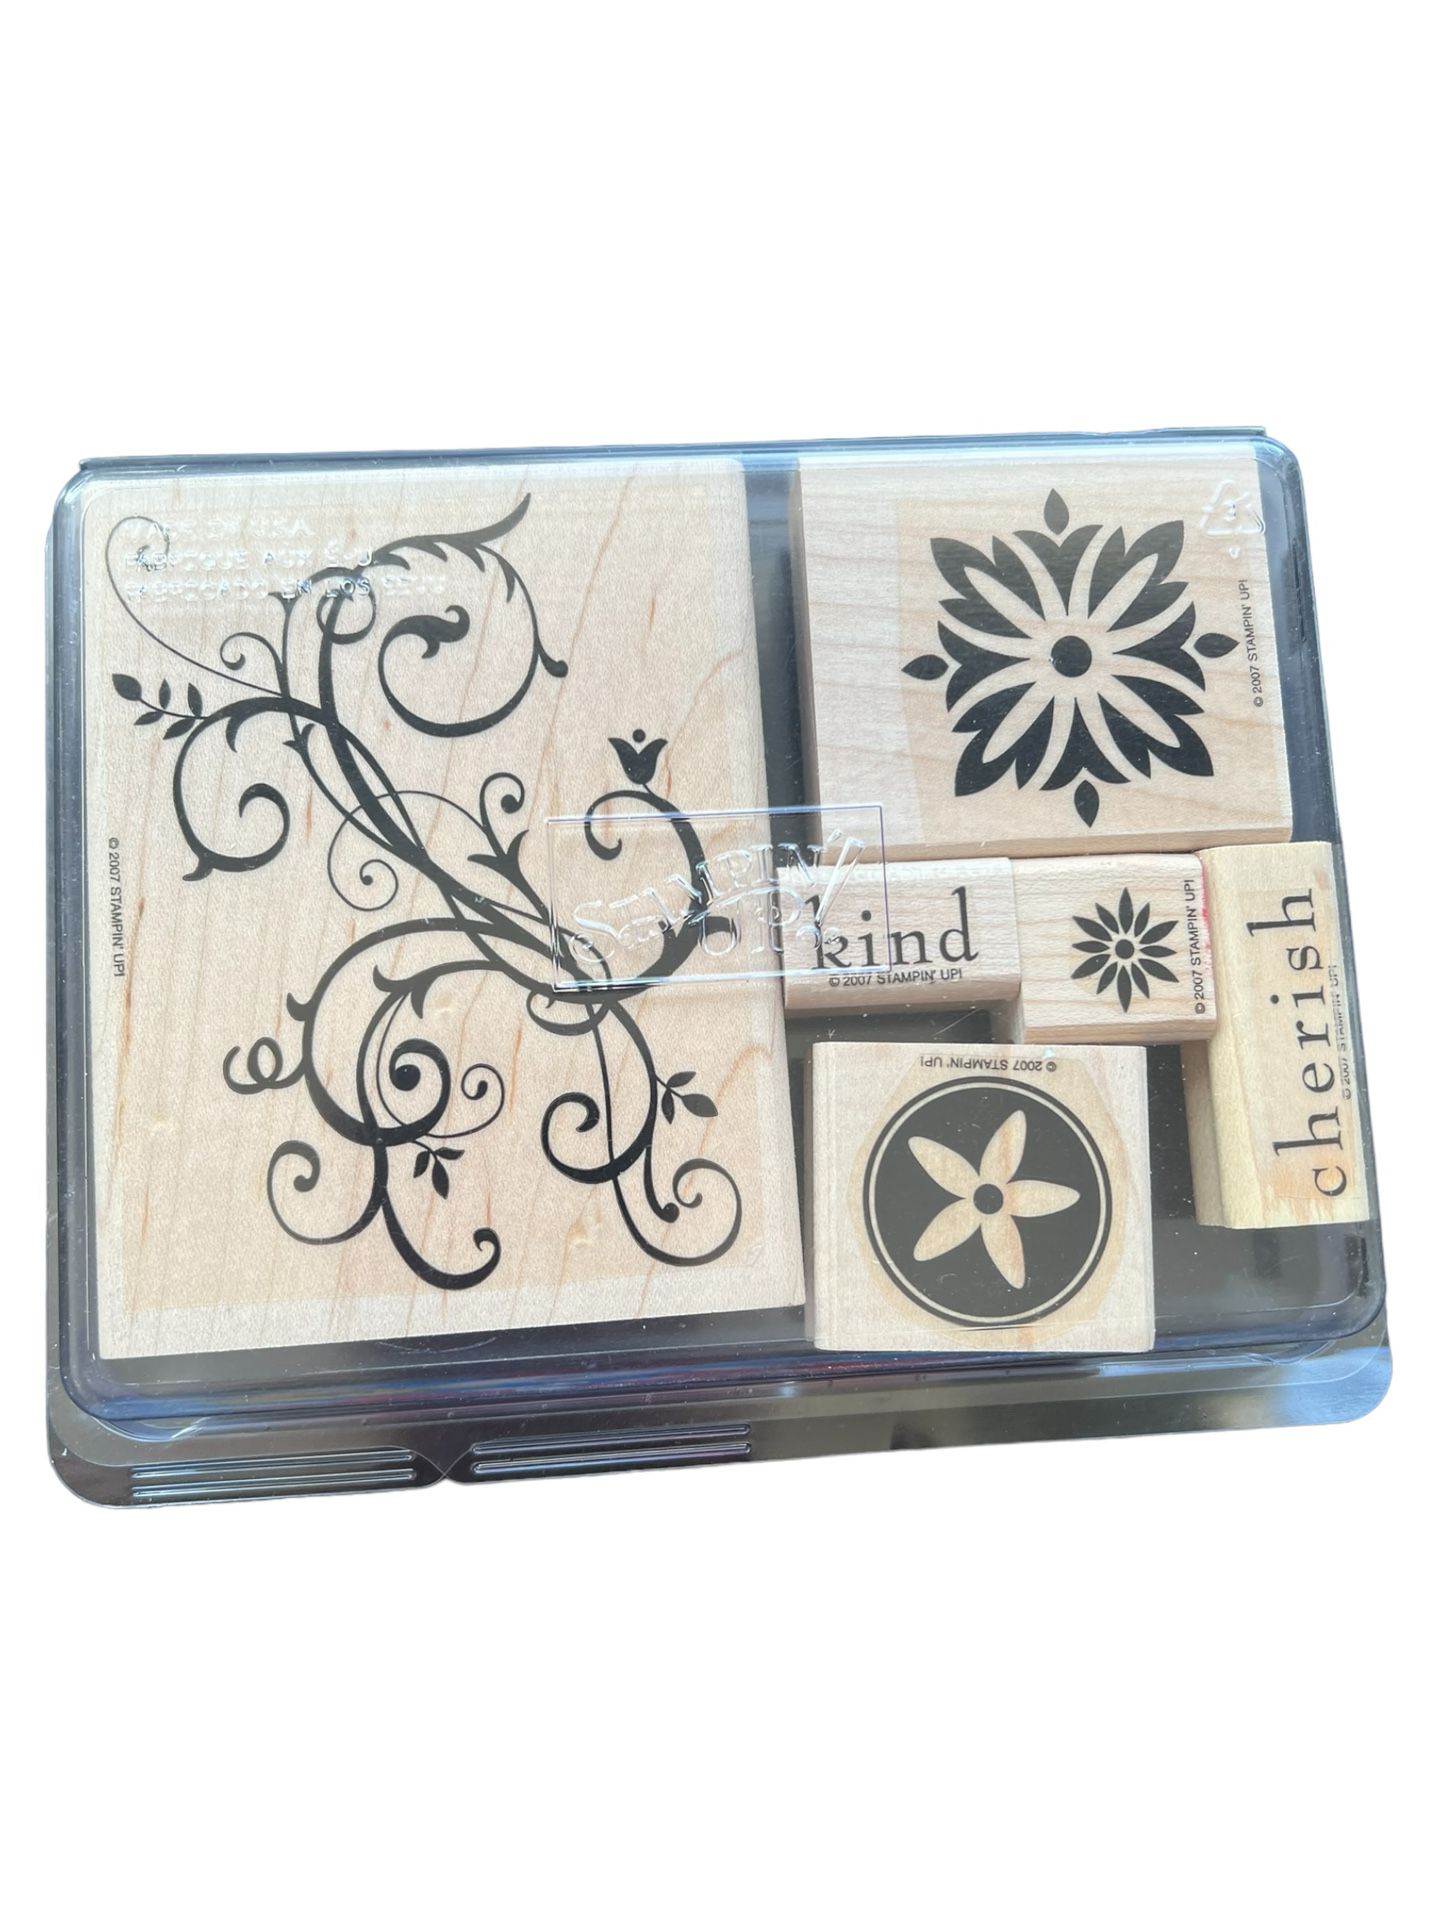 Stampin' Up! BAROQUE MOTIFS Set of 6 Rubber Stamps Cherish Kind Floral Swirls  Add a touch of elegance and charm to your crafting projects with this s